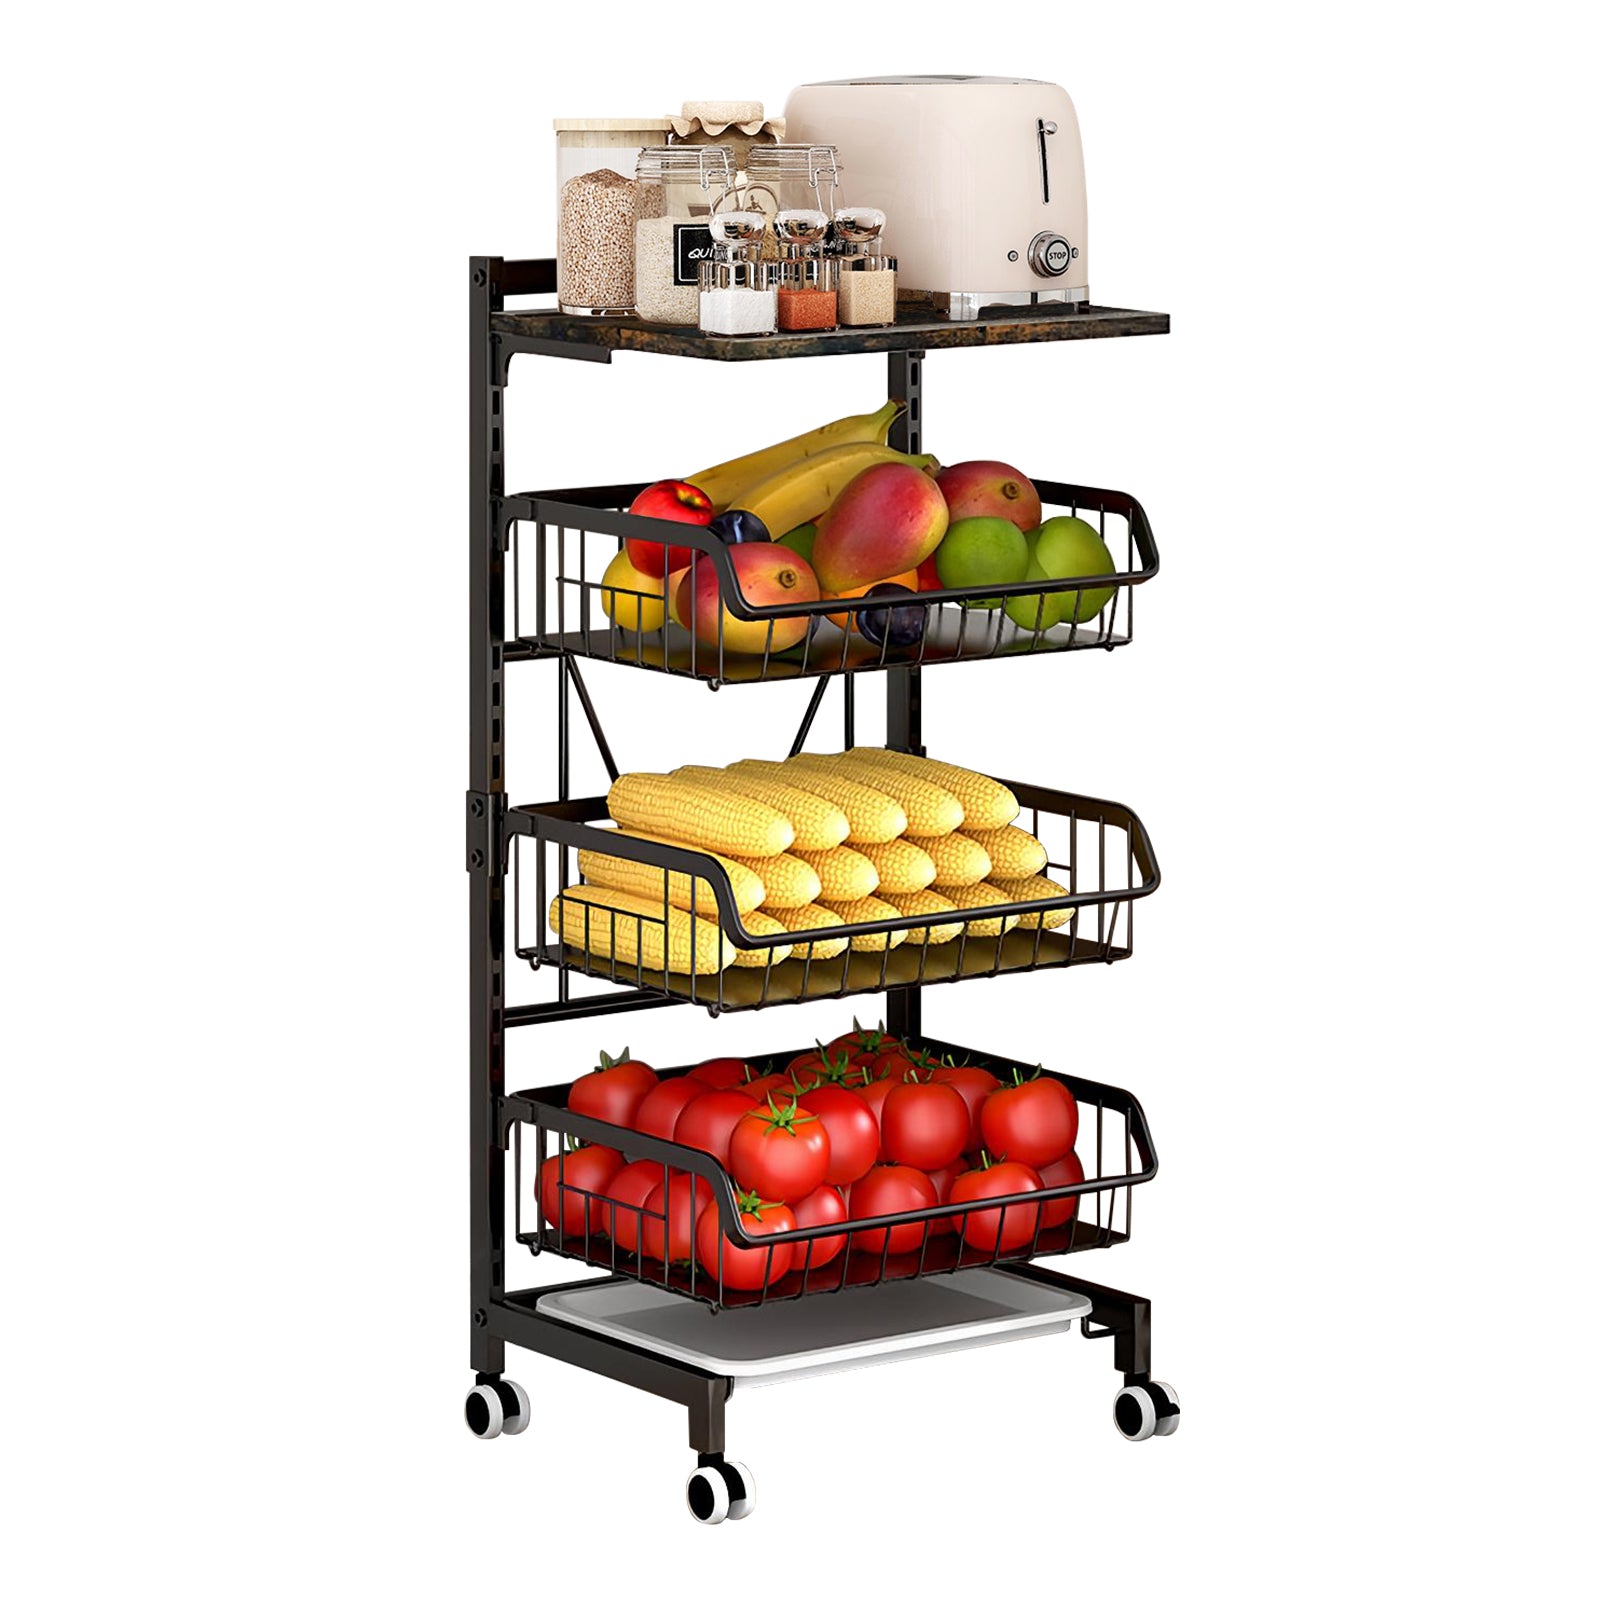 Todeco-Fruit-and-Vegetable-Basket-with-Wheels-Vegetable-Rack-for-Kitchen-4-Tiers-with-Board-Storage-Cart-with-Locking-Casters-and-Tray-for-Kitchen-Fruits-Vegetables-Fruit-and-Vegetable-Basket-4-Tiers-with-Board